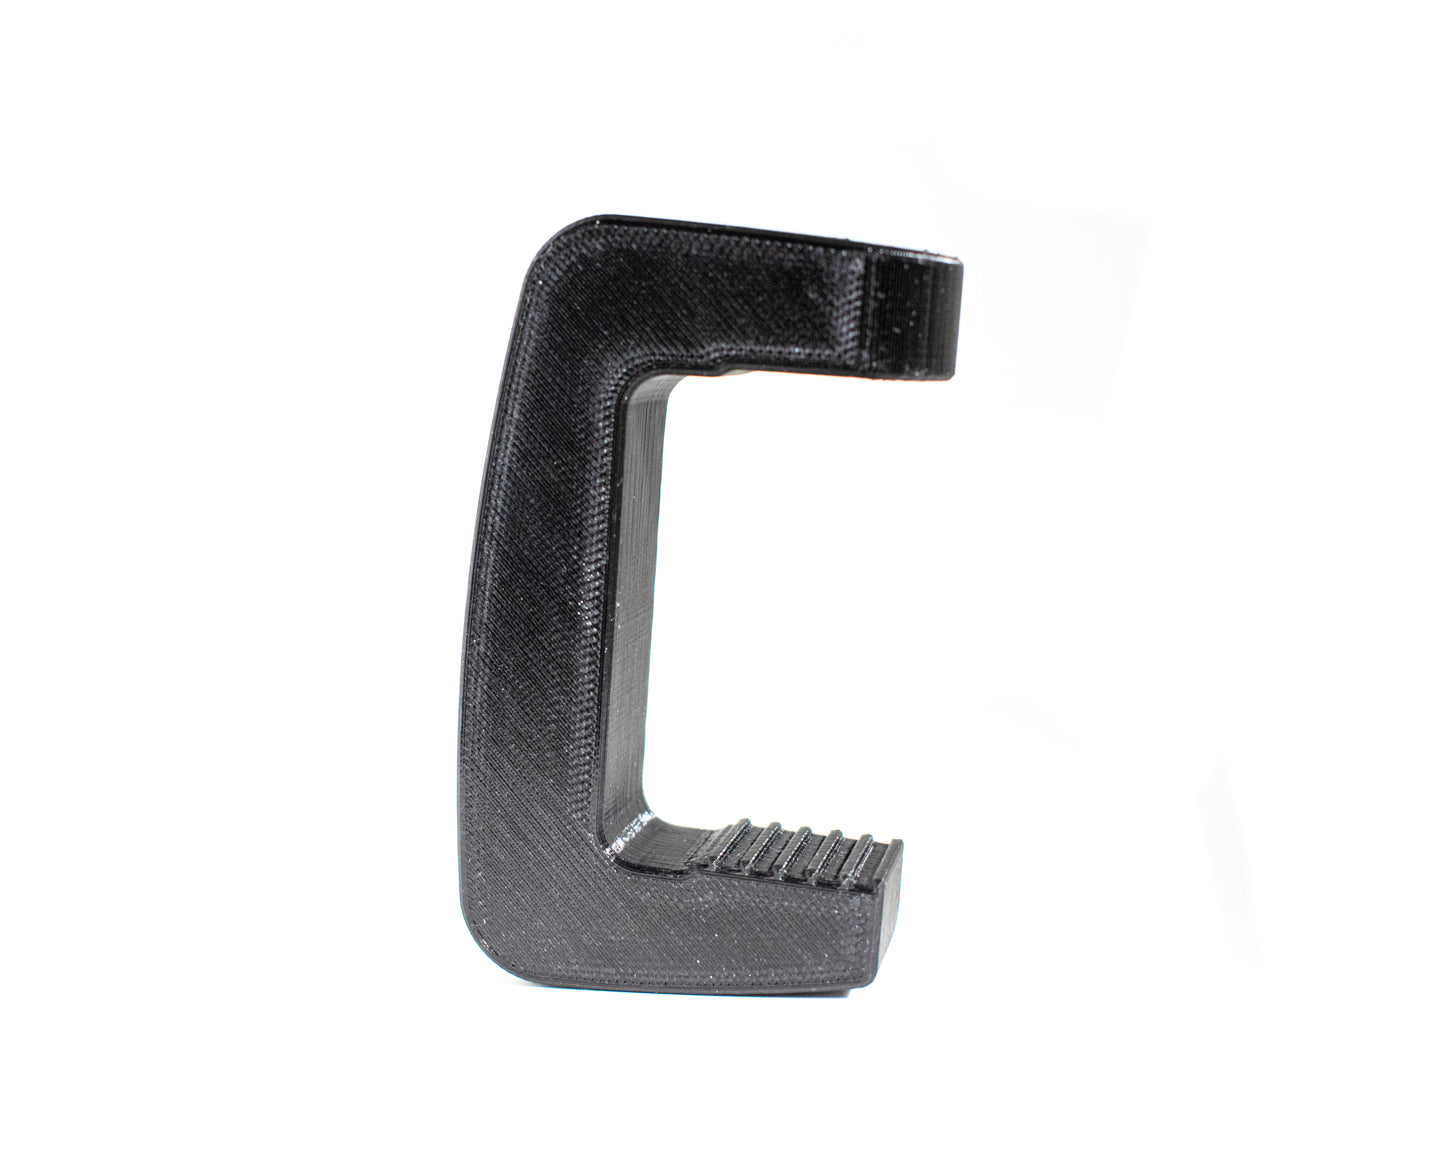 Replacement desk clamp for Logitech G25/G27/G29/G920